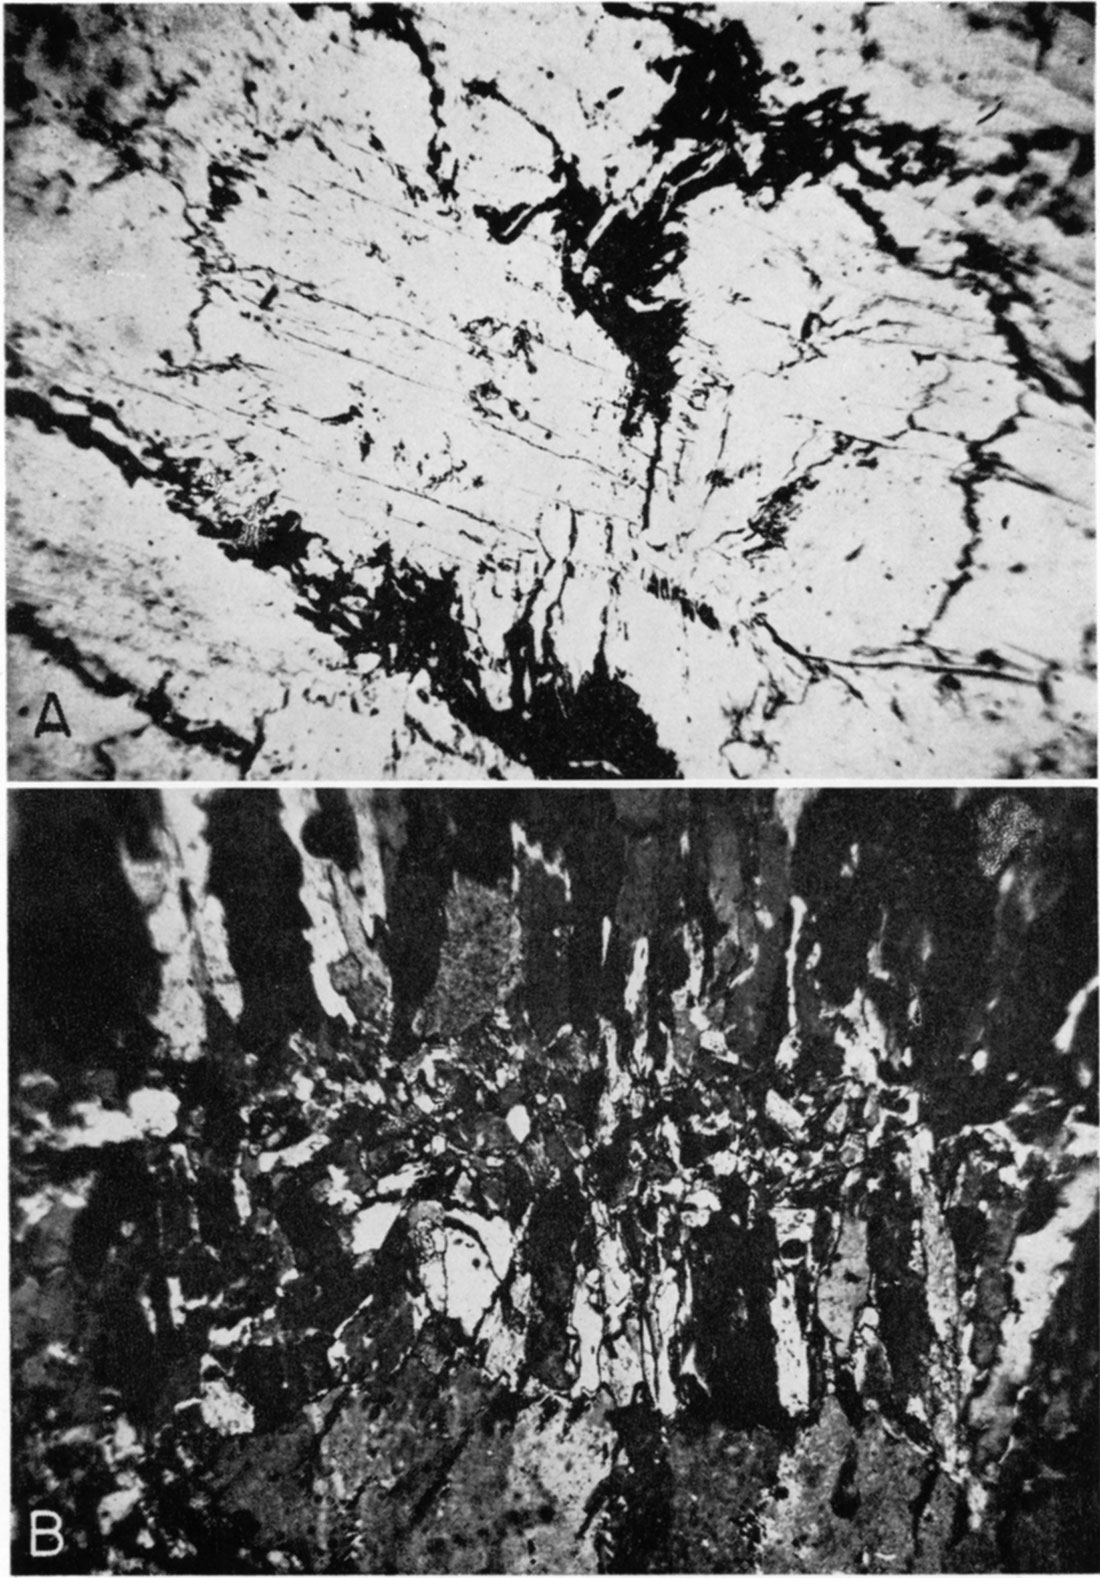 Two black and white photomicrographs of gypsum.